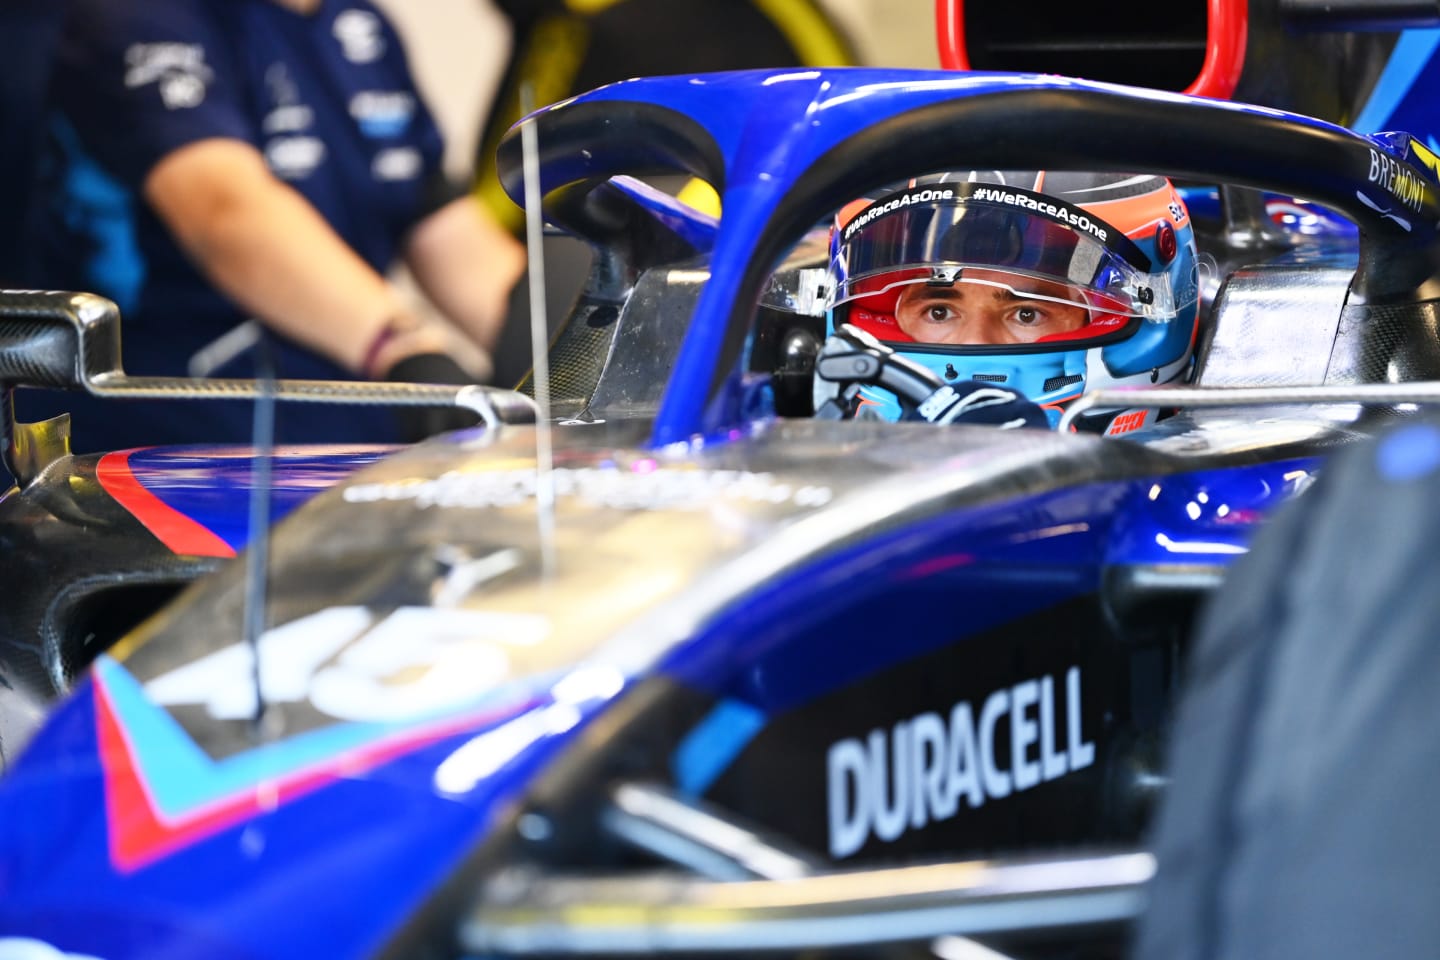 MONZA, ITALY - SEPTEMBER 10: Nyck de Vries of Netherlands and Williams prepares to drive in the garage during final practice ahead of the F1 Grand Prix of Italy at Autodromo Nazionale Monza on September 10, 2022 in Monza, Italy. (Photo by Dan Mullan/Getty Images)